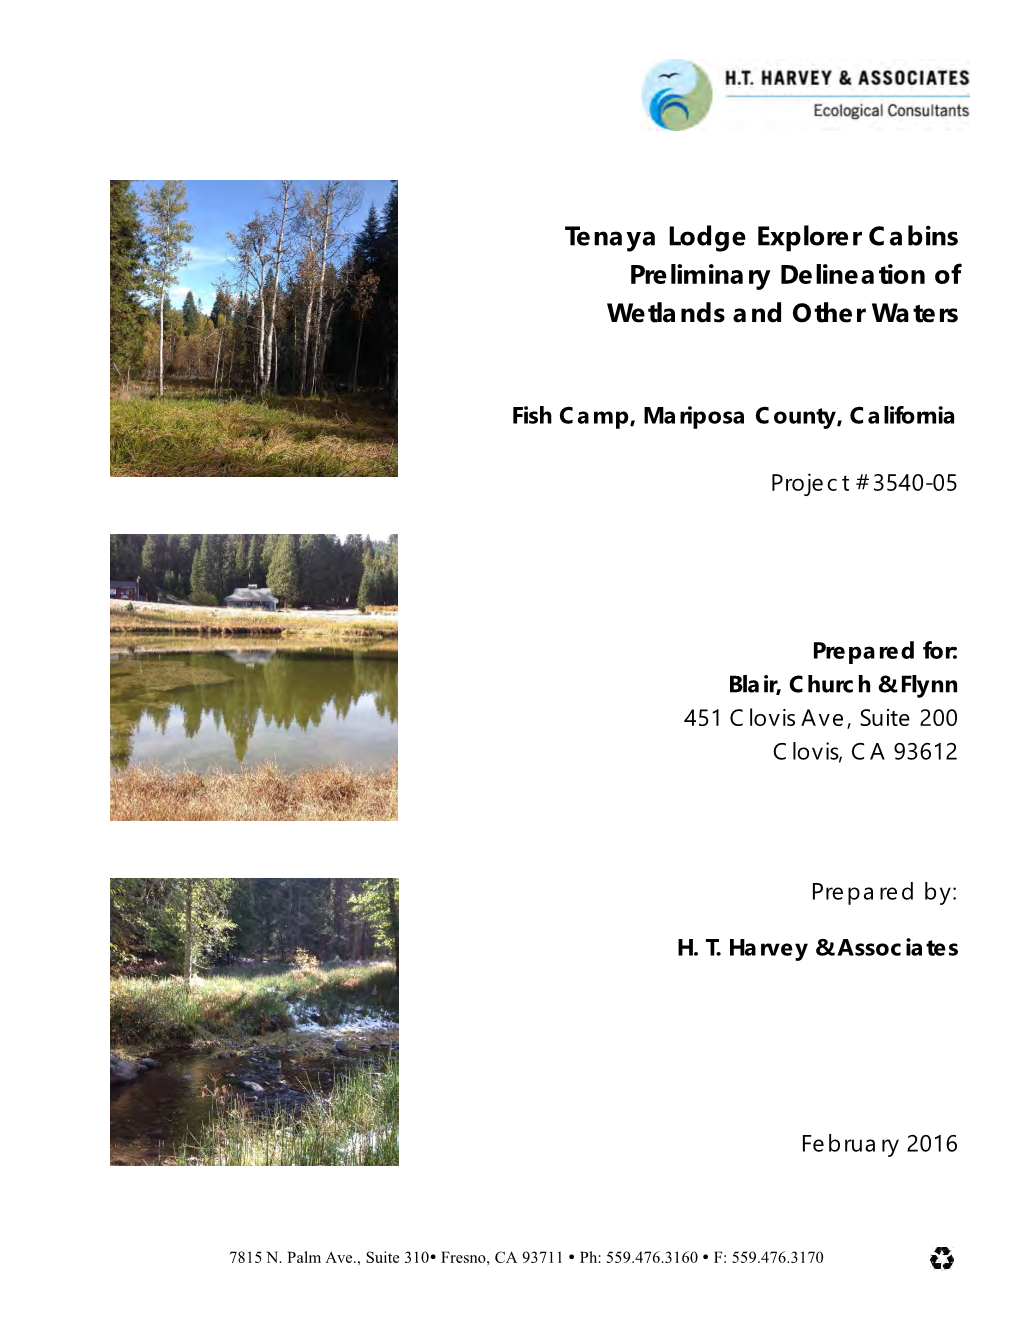 Tenaya Lodge Explorer Cabins Preliminary Delineation of Wetlands and Other Waters